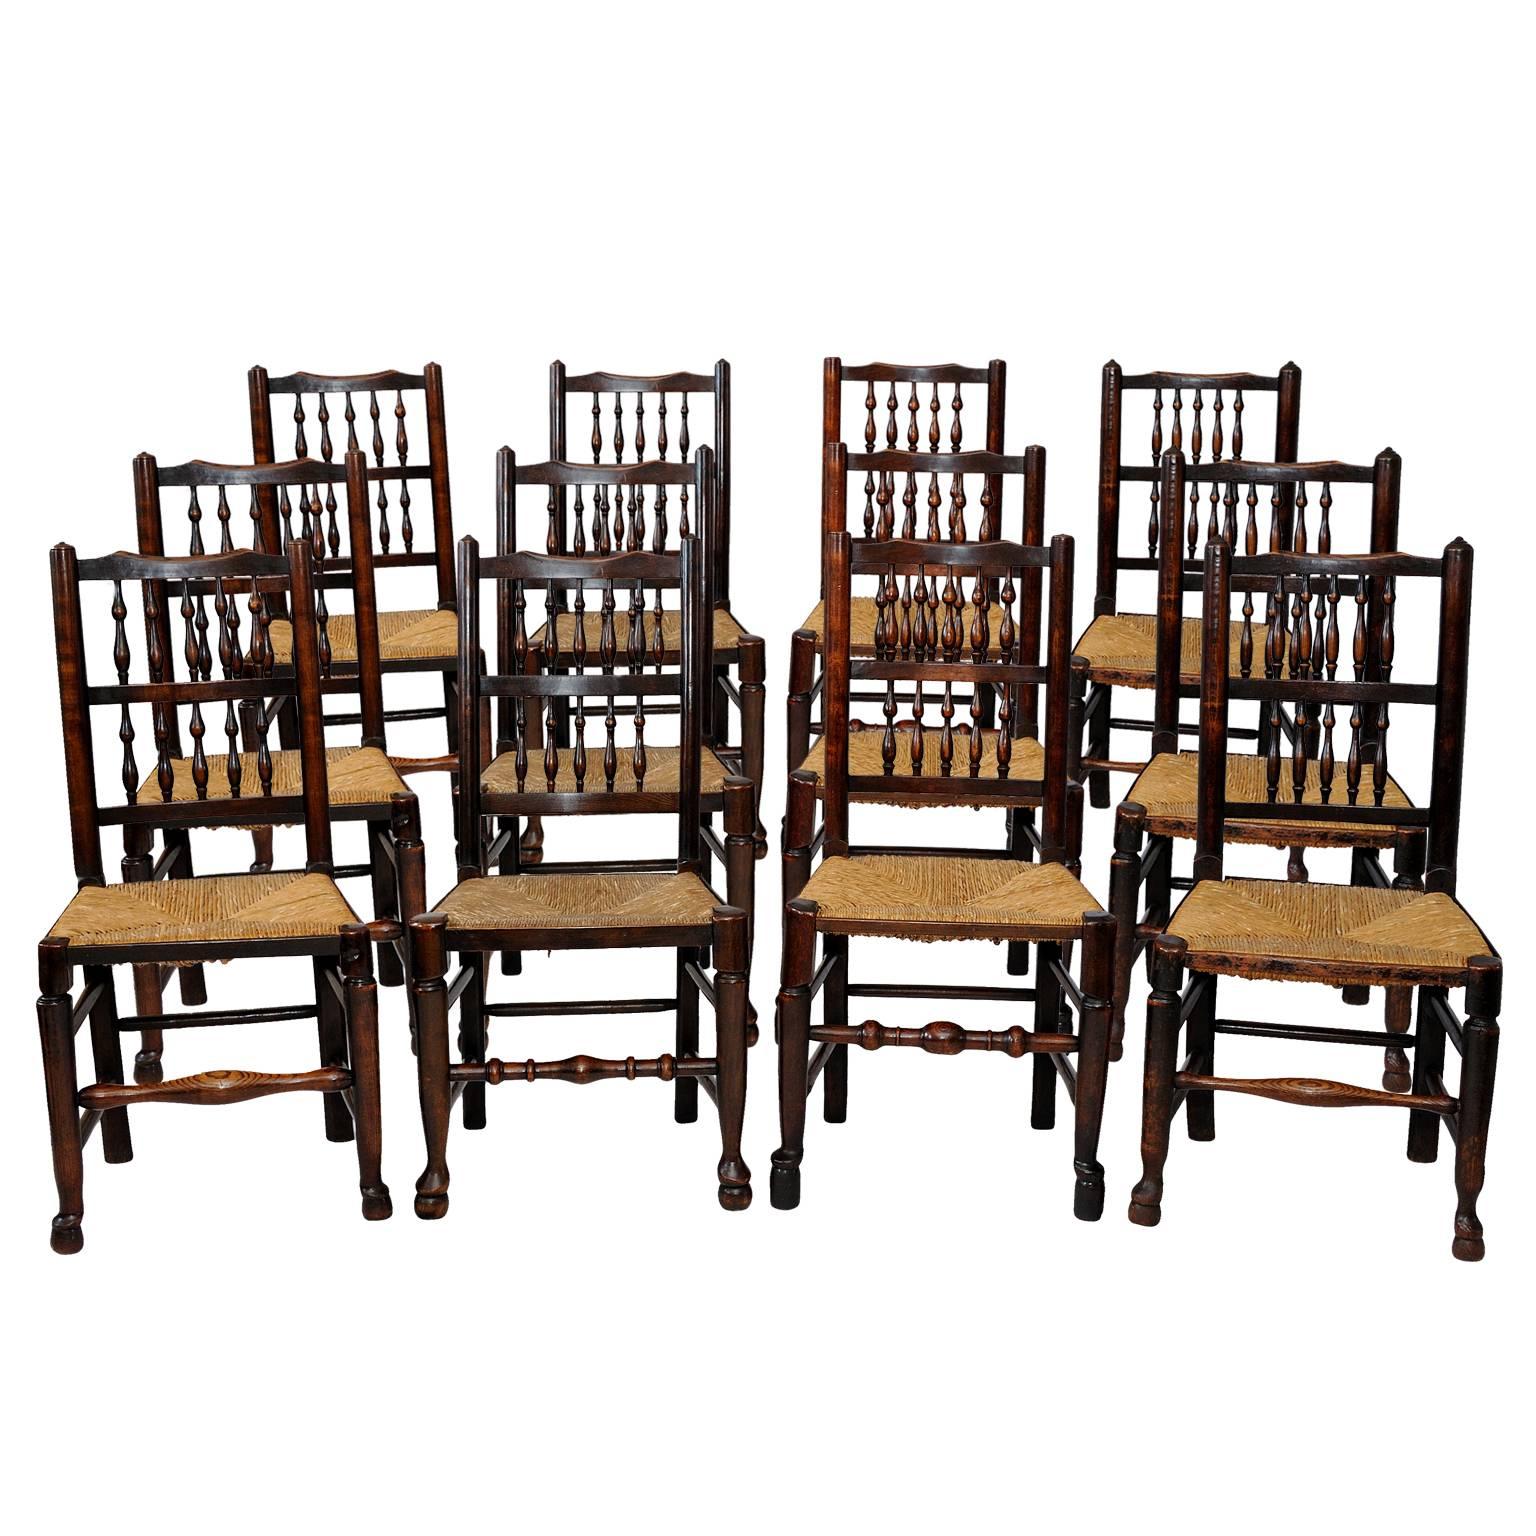 A Harlequin set of 12 Georgian Oak and Elm Spindle Back Chairs, circa 1820 For Sale